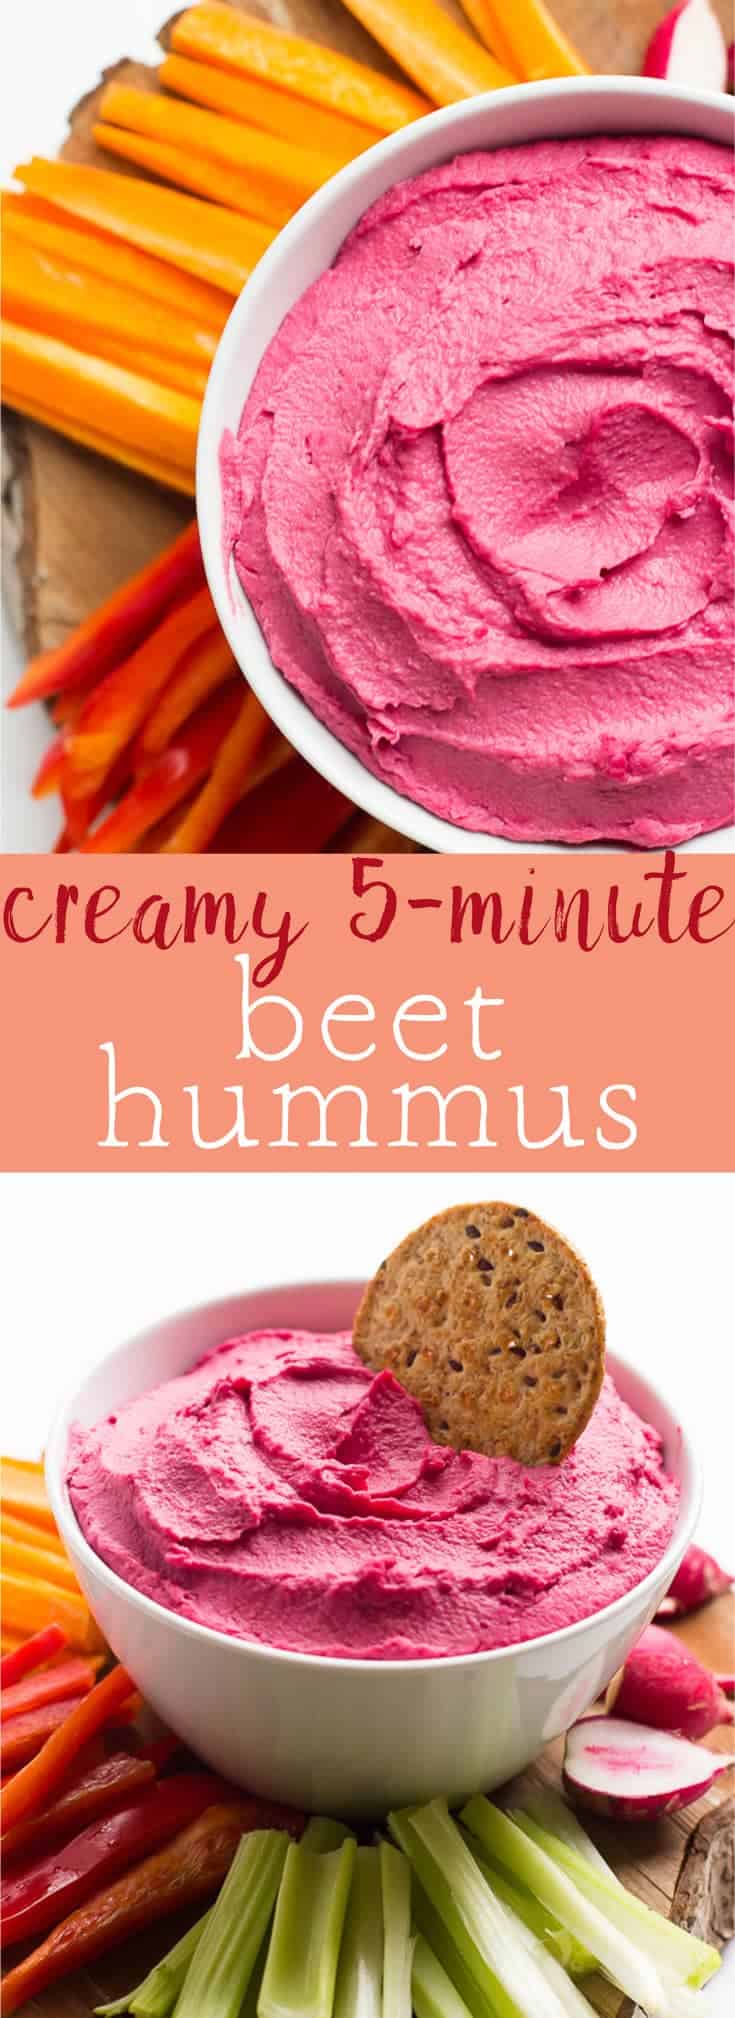 This Creamy 5 Minute Beet Hummus includes roasted beets which makes a creamy and velvet smooth and absolutely delicious unique hummus. It's great as a snack or dip, and is vegan and gluten free! via https://jessicainthekitchen.com